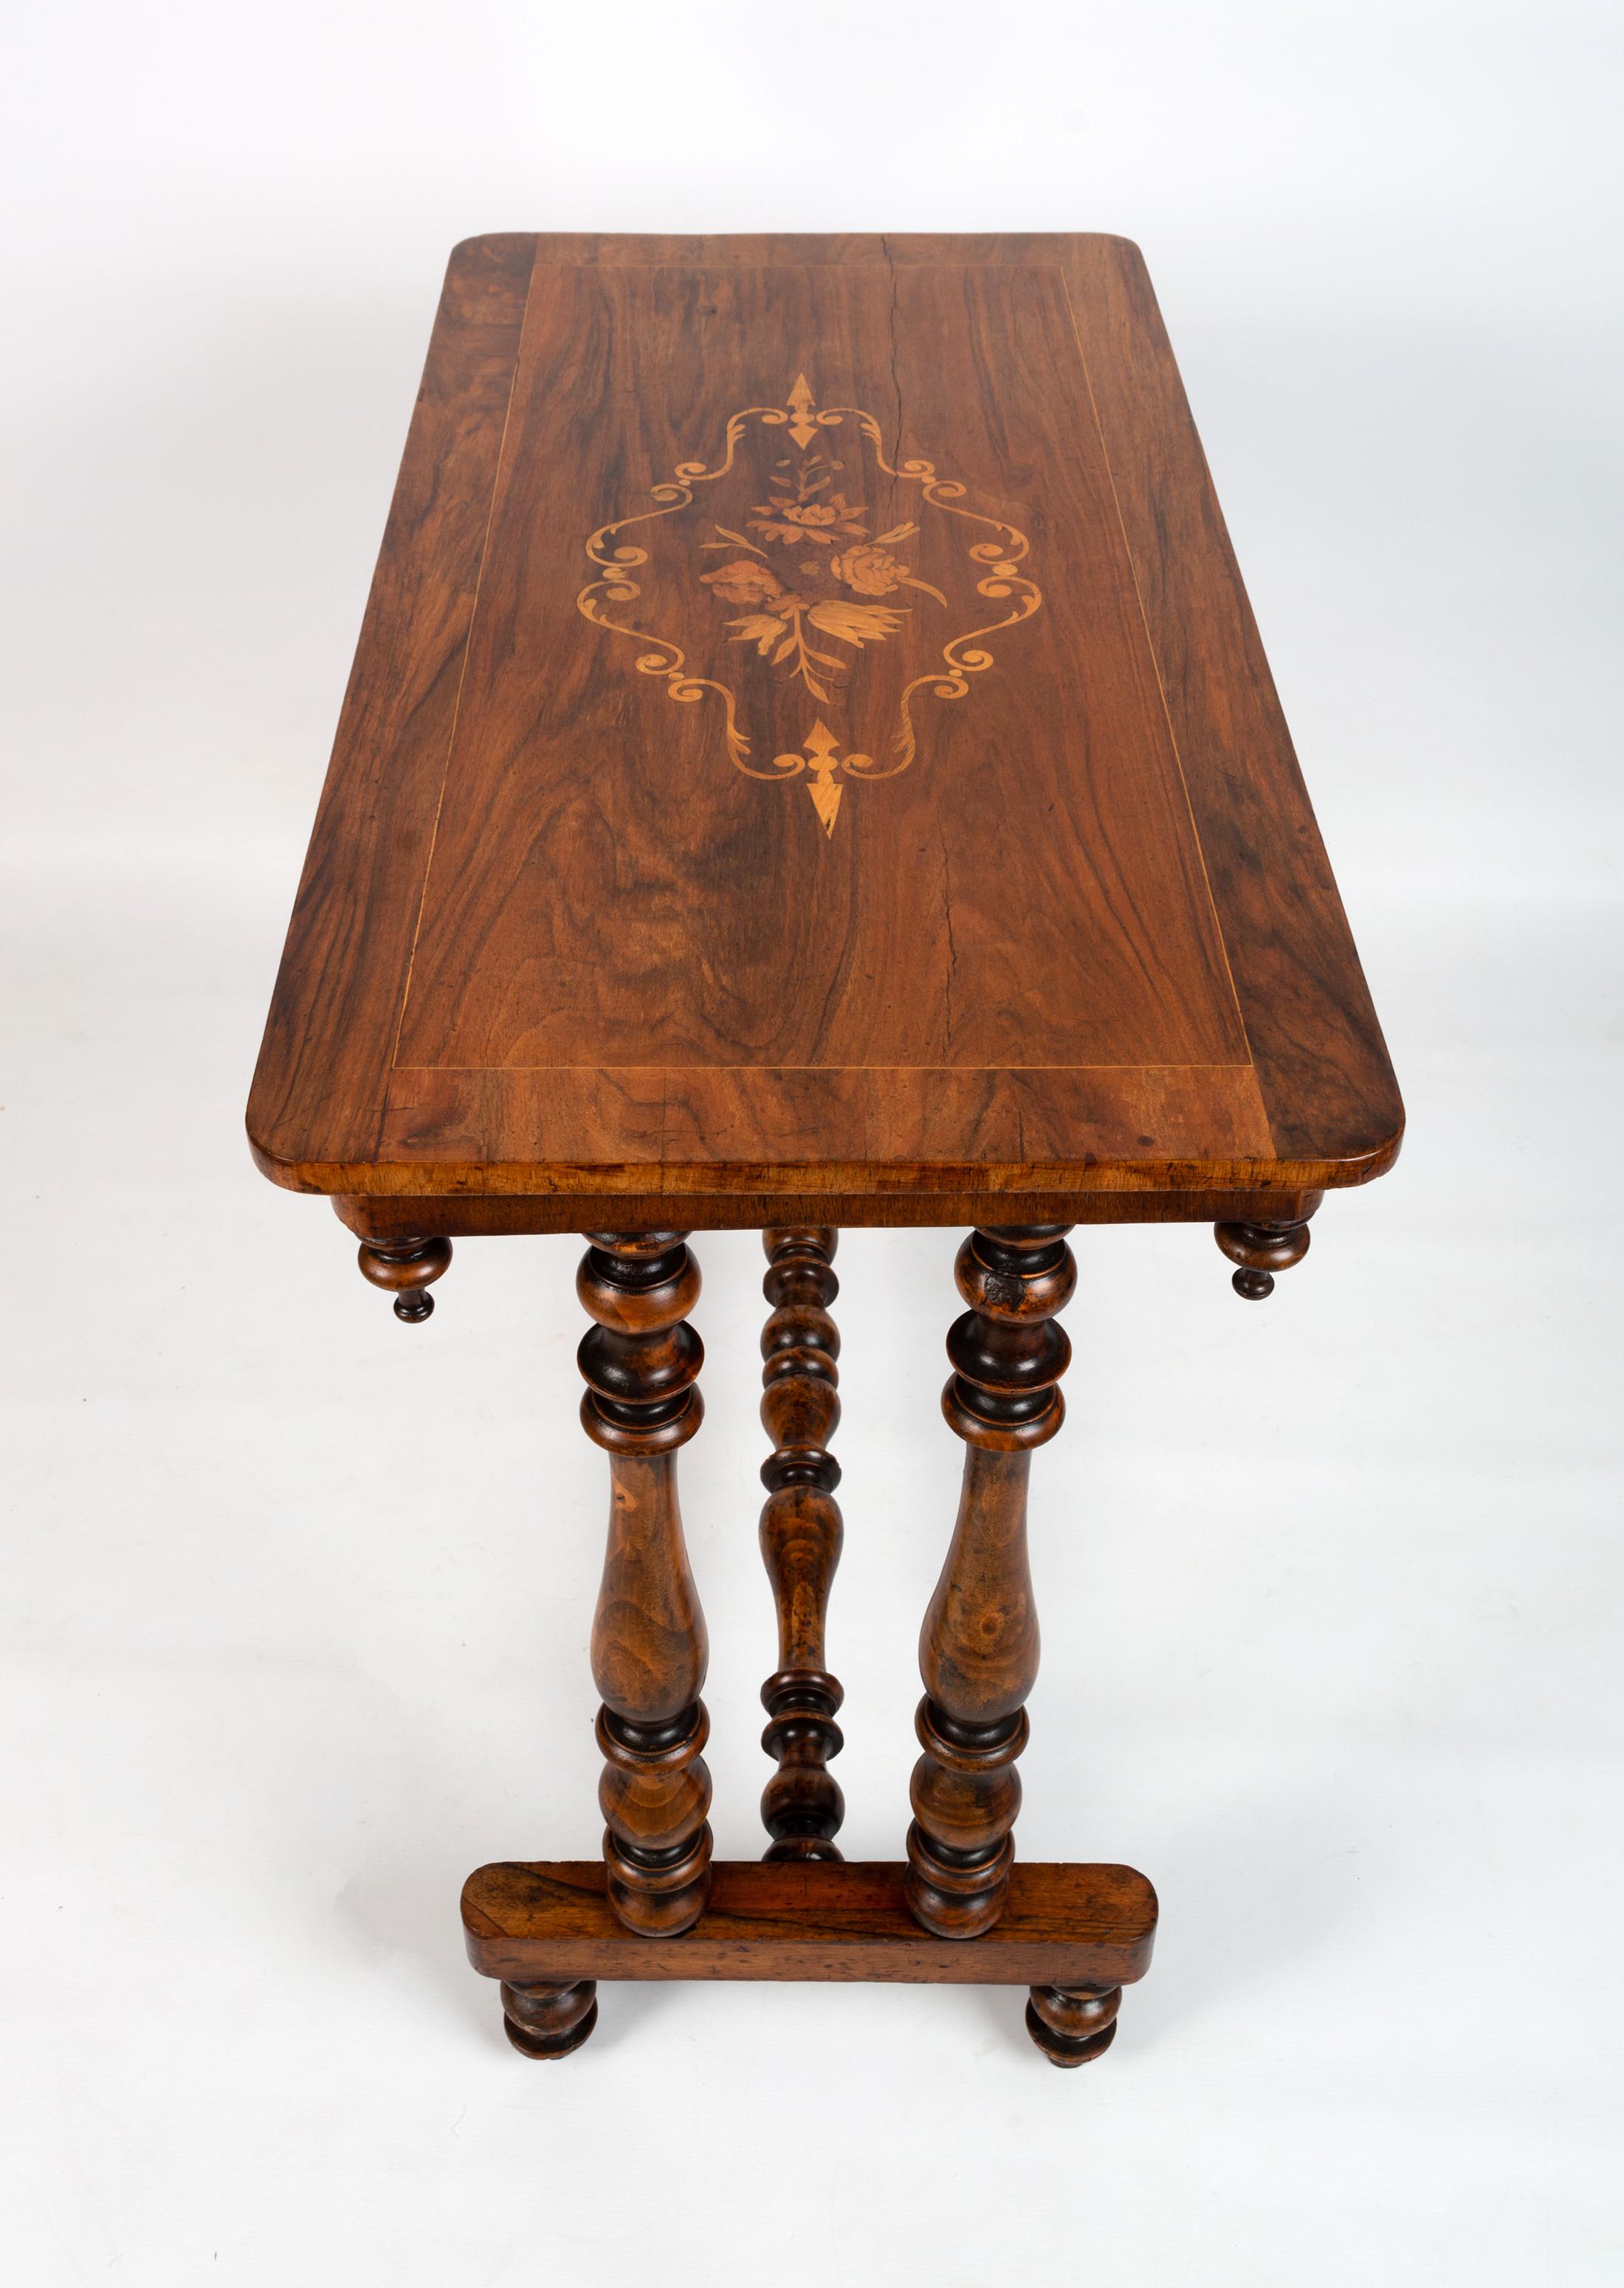 Antique English Edwardian Inlaid Walnut Hall Table Console C.1900 For Sale 3